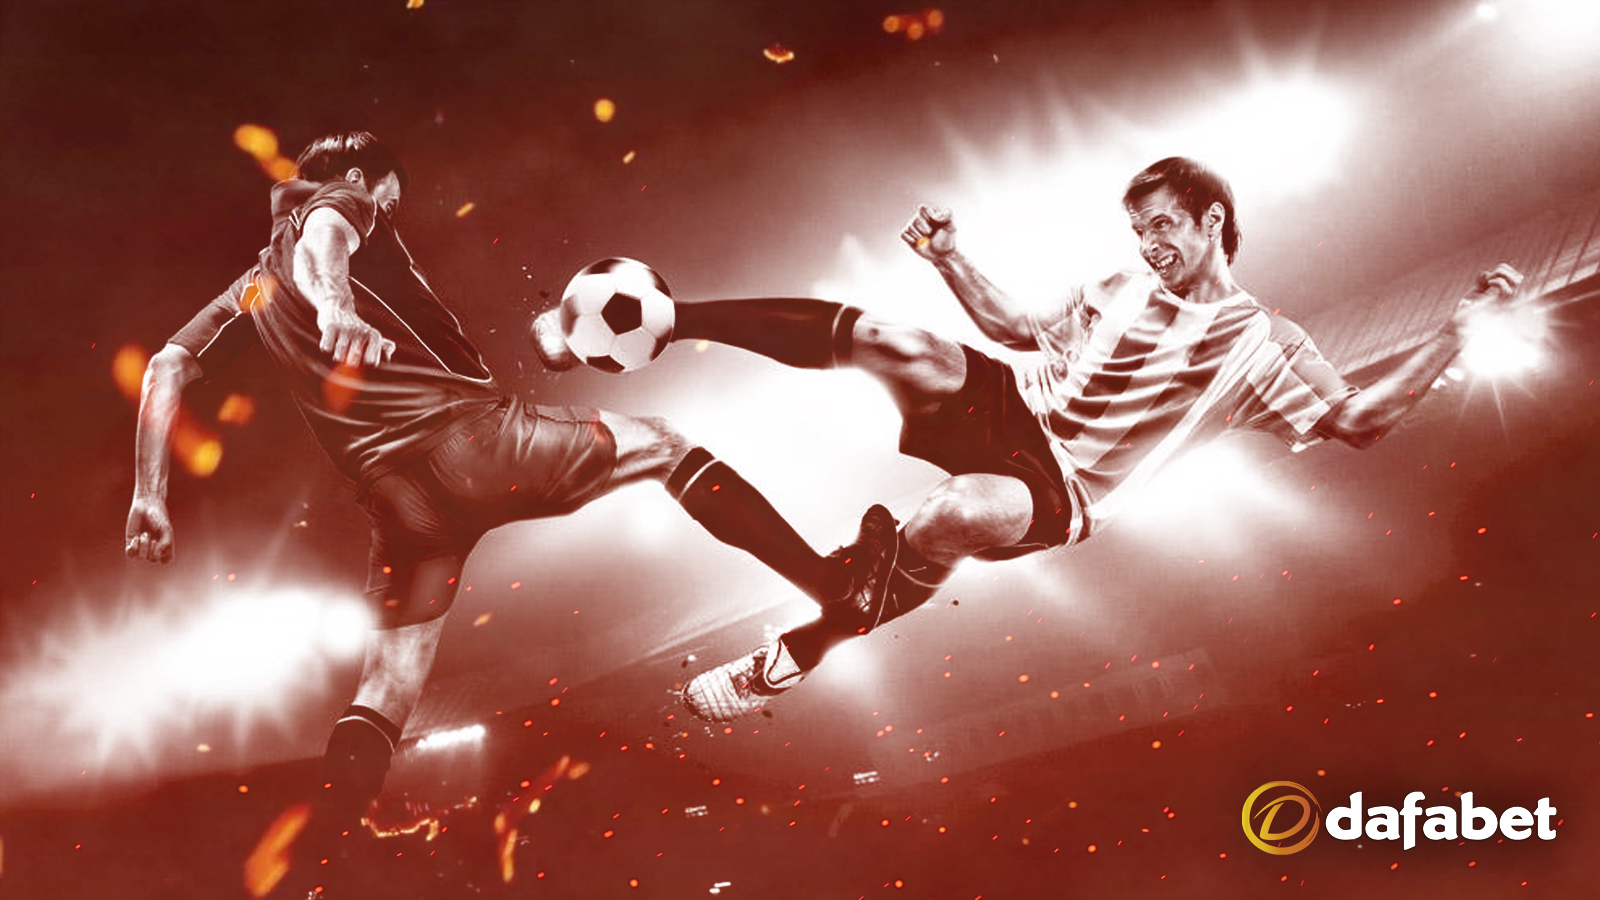 Choose your favorite sport game and place a bet via Dafabet sportsbook.